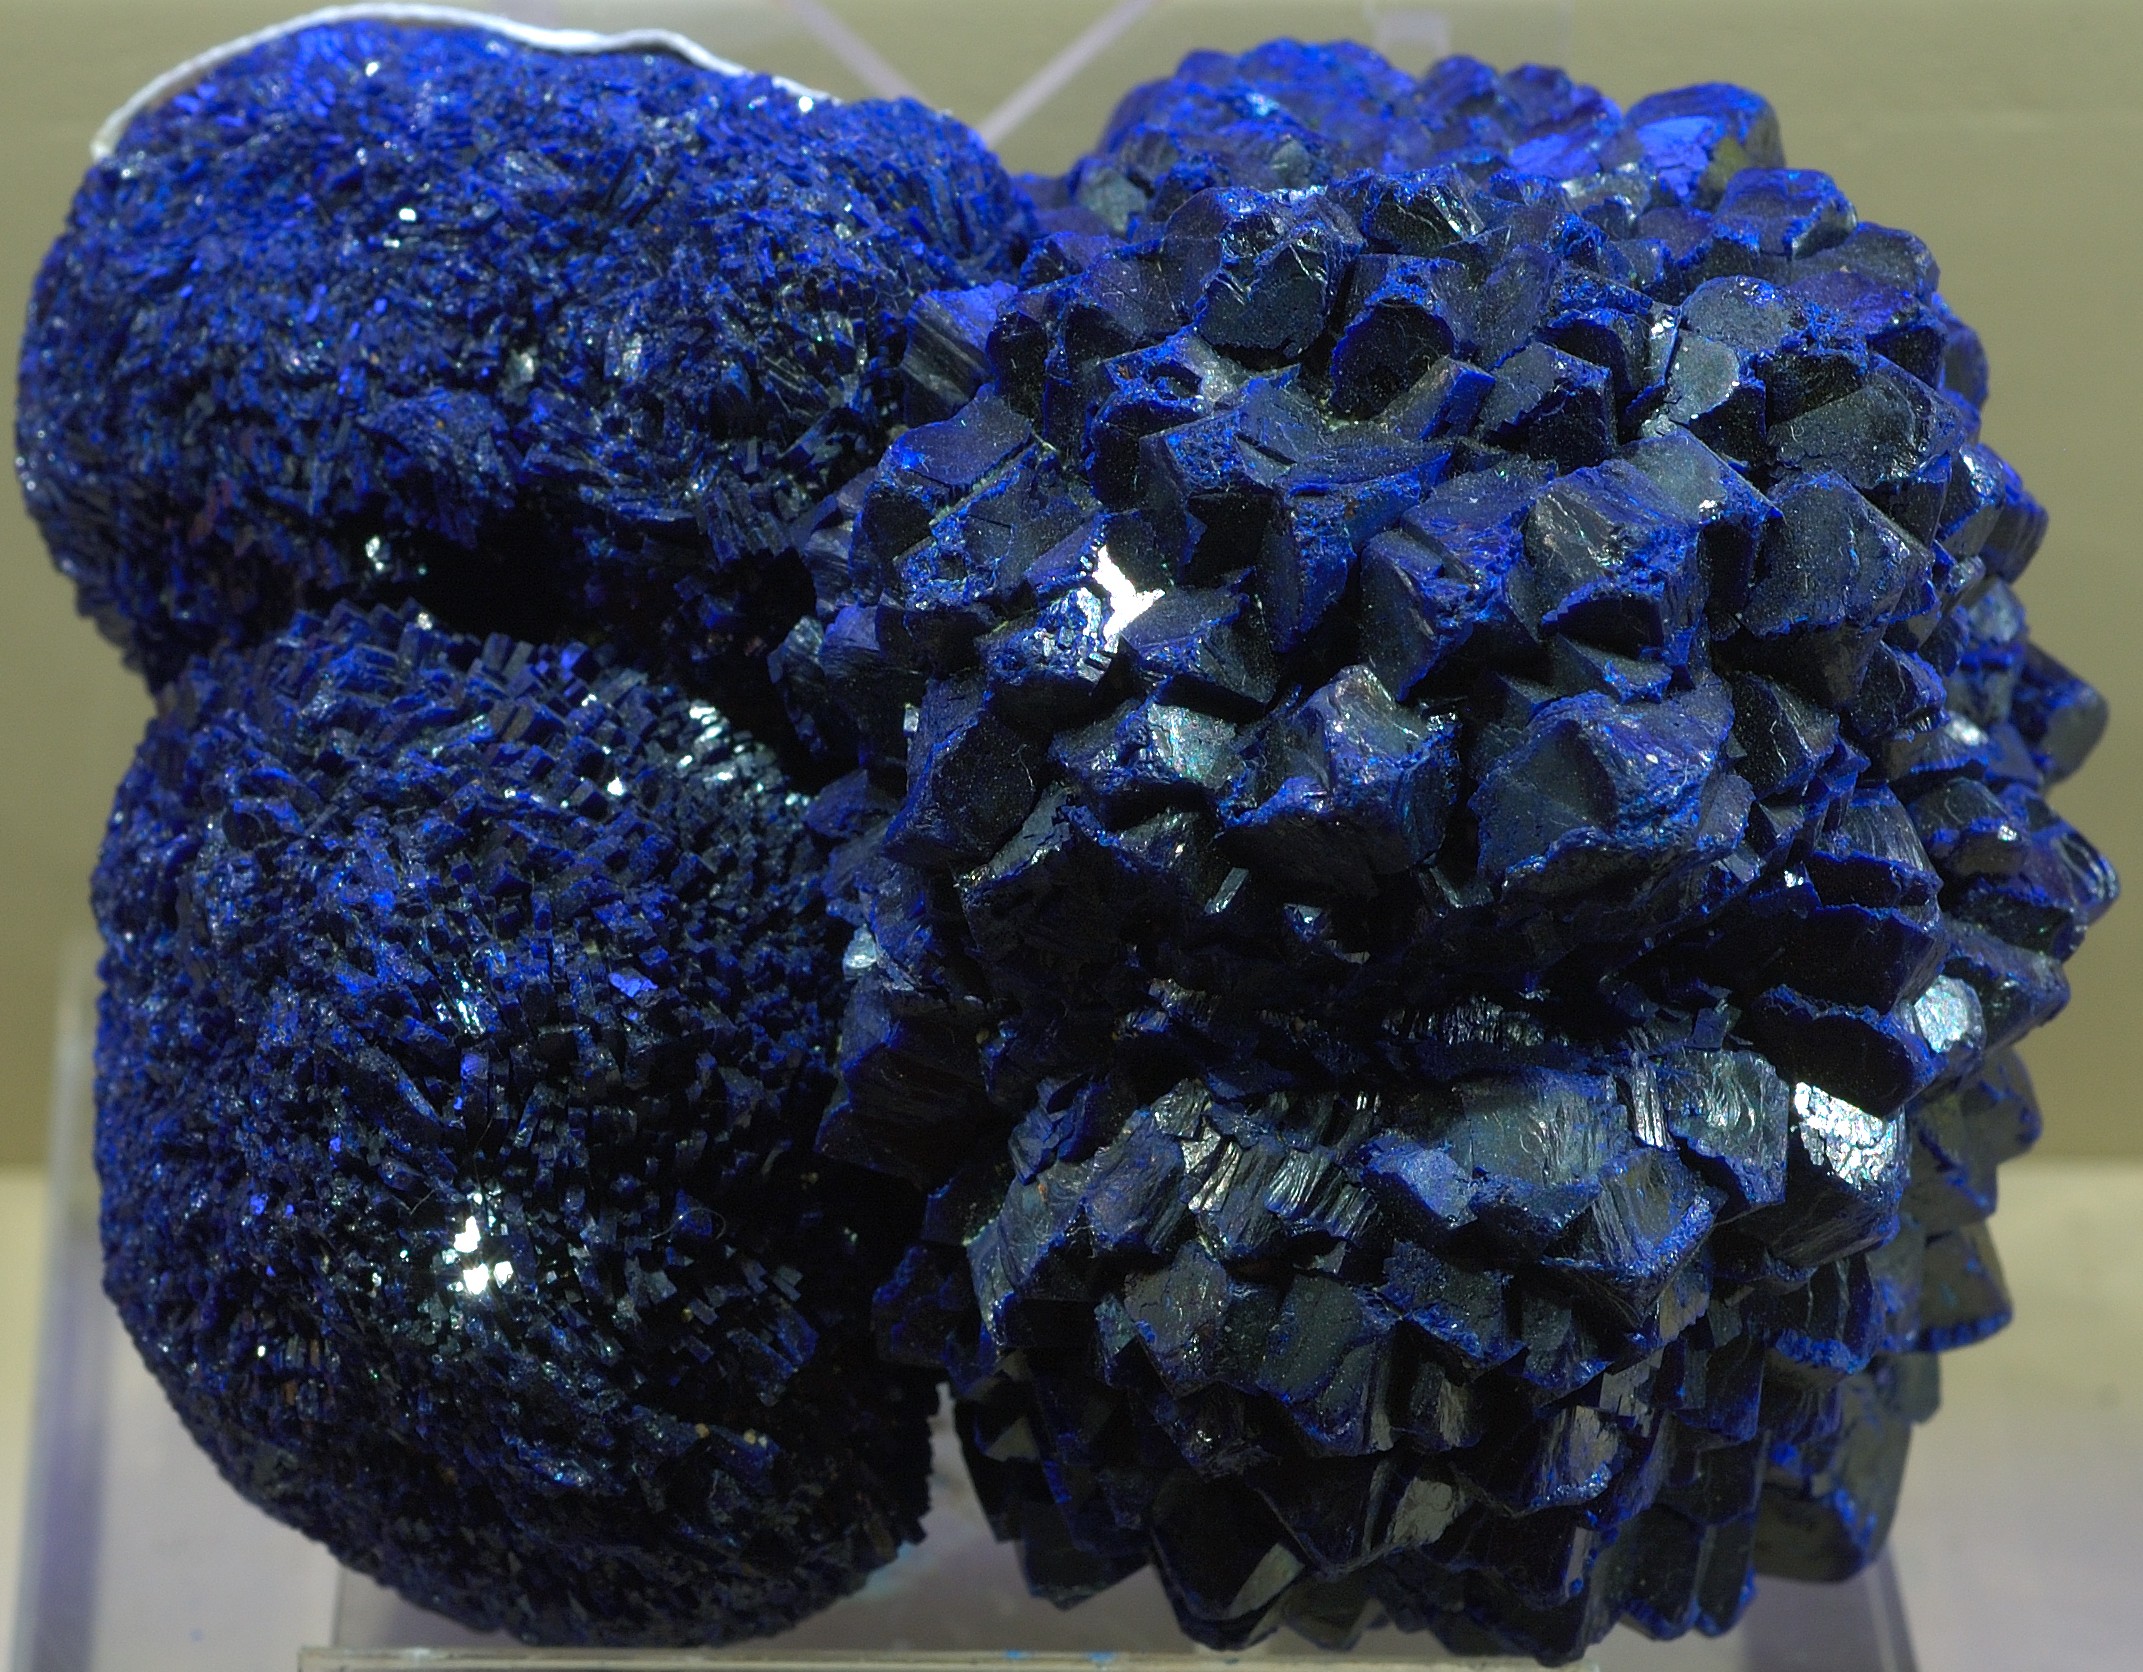 Von Rob Lavinsky, iRocks.com – CC-BY-SA-3.0 (picture shows Azurite, not necessarily the one from Vinča)